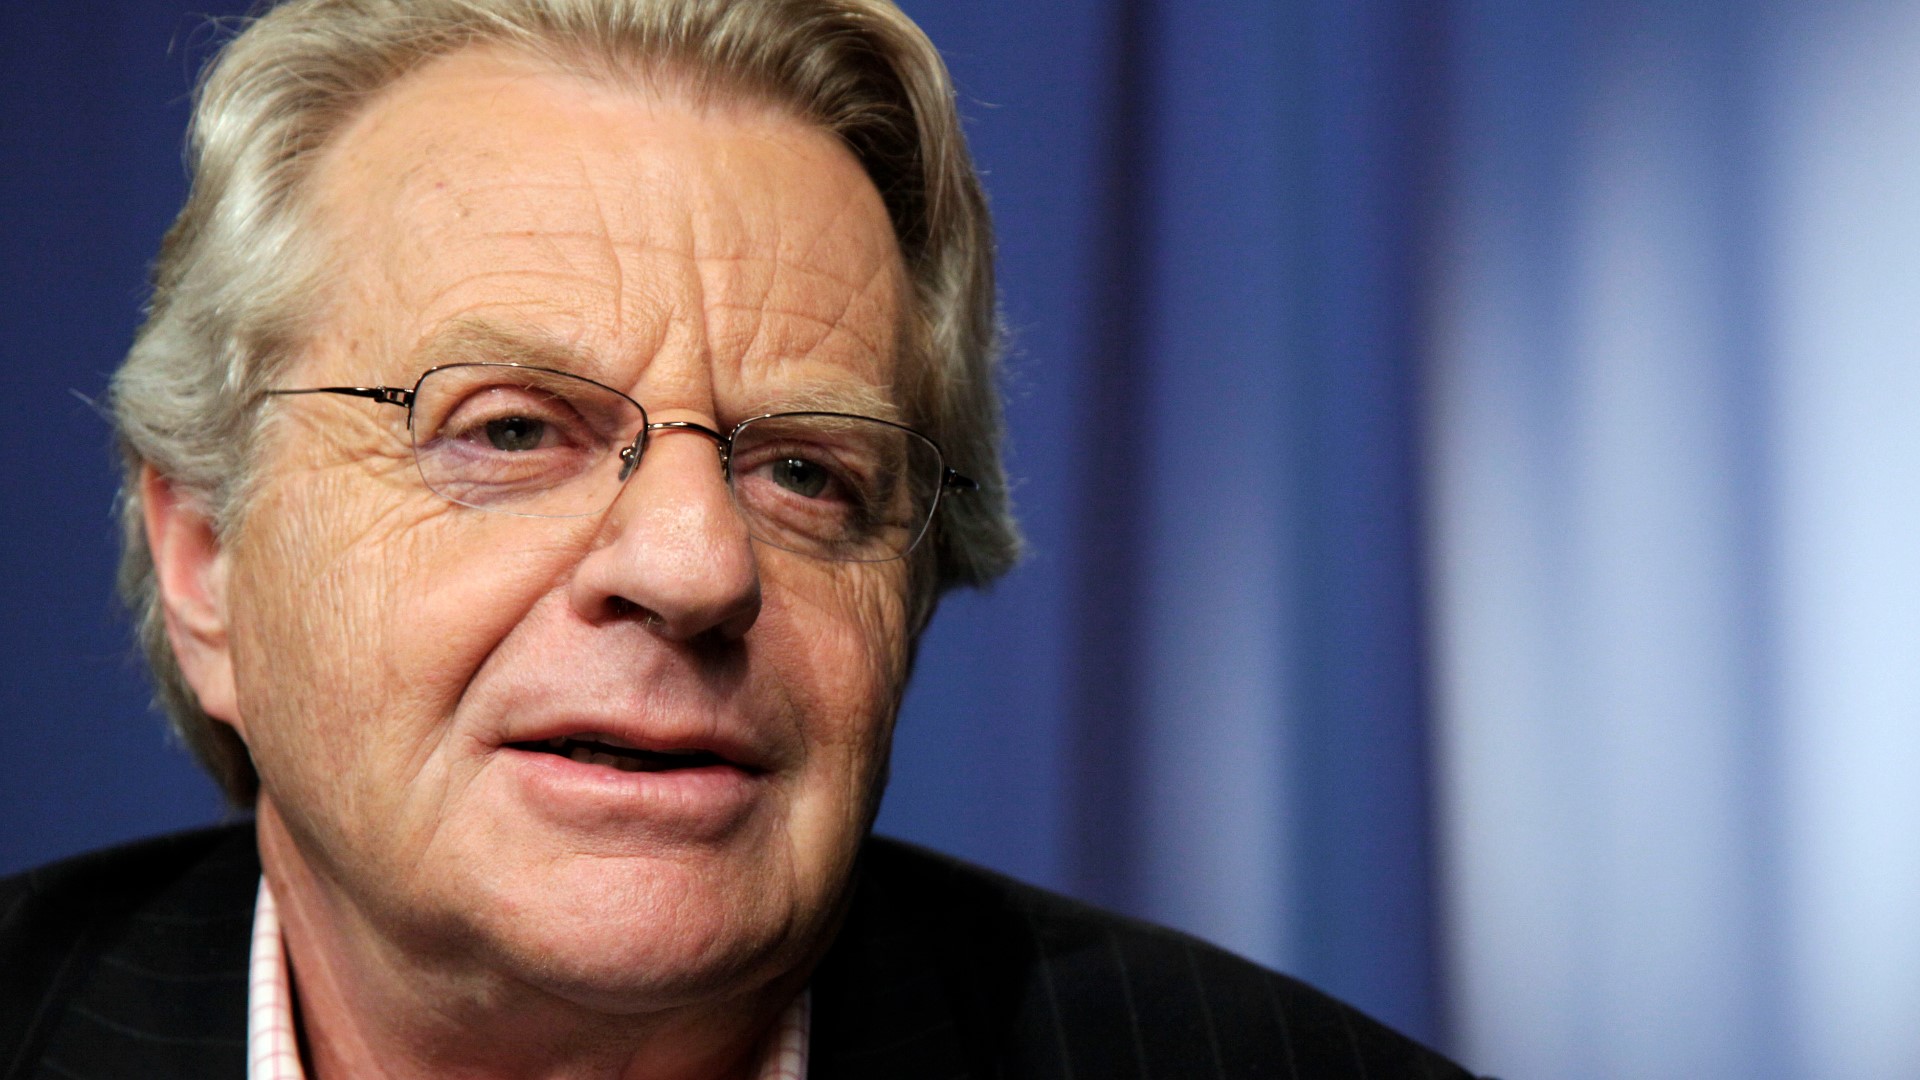 On his Twitter profile, Jerry Springer jokingly declared himself a “Talk show host, ringmaster of civilization’s end.”